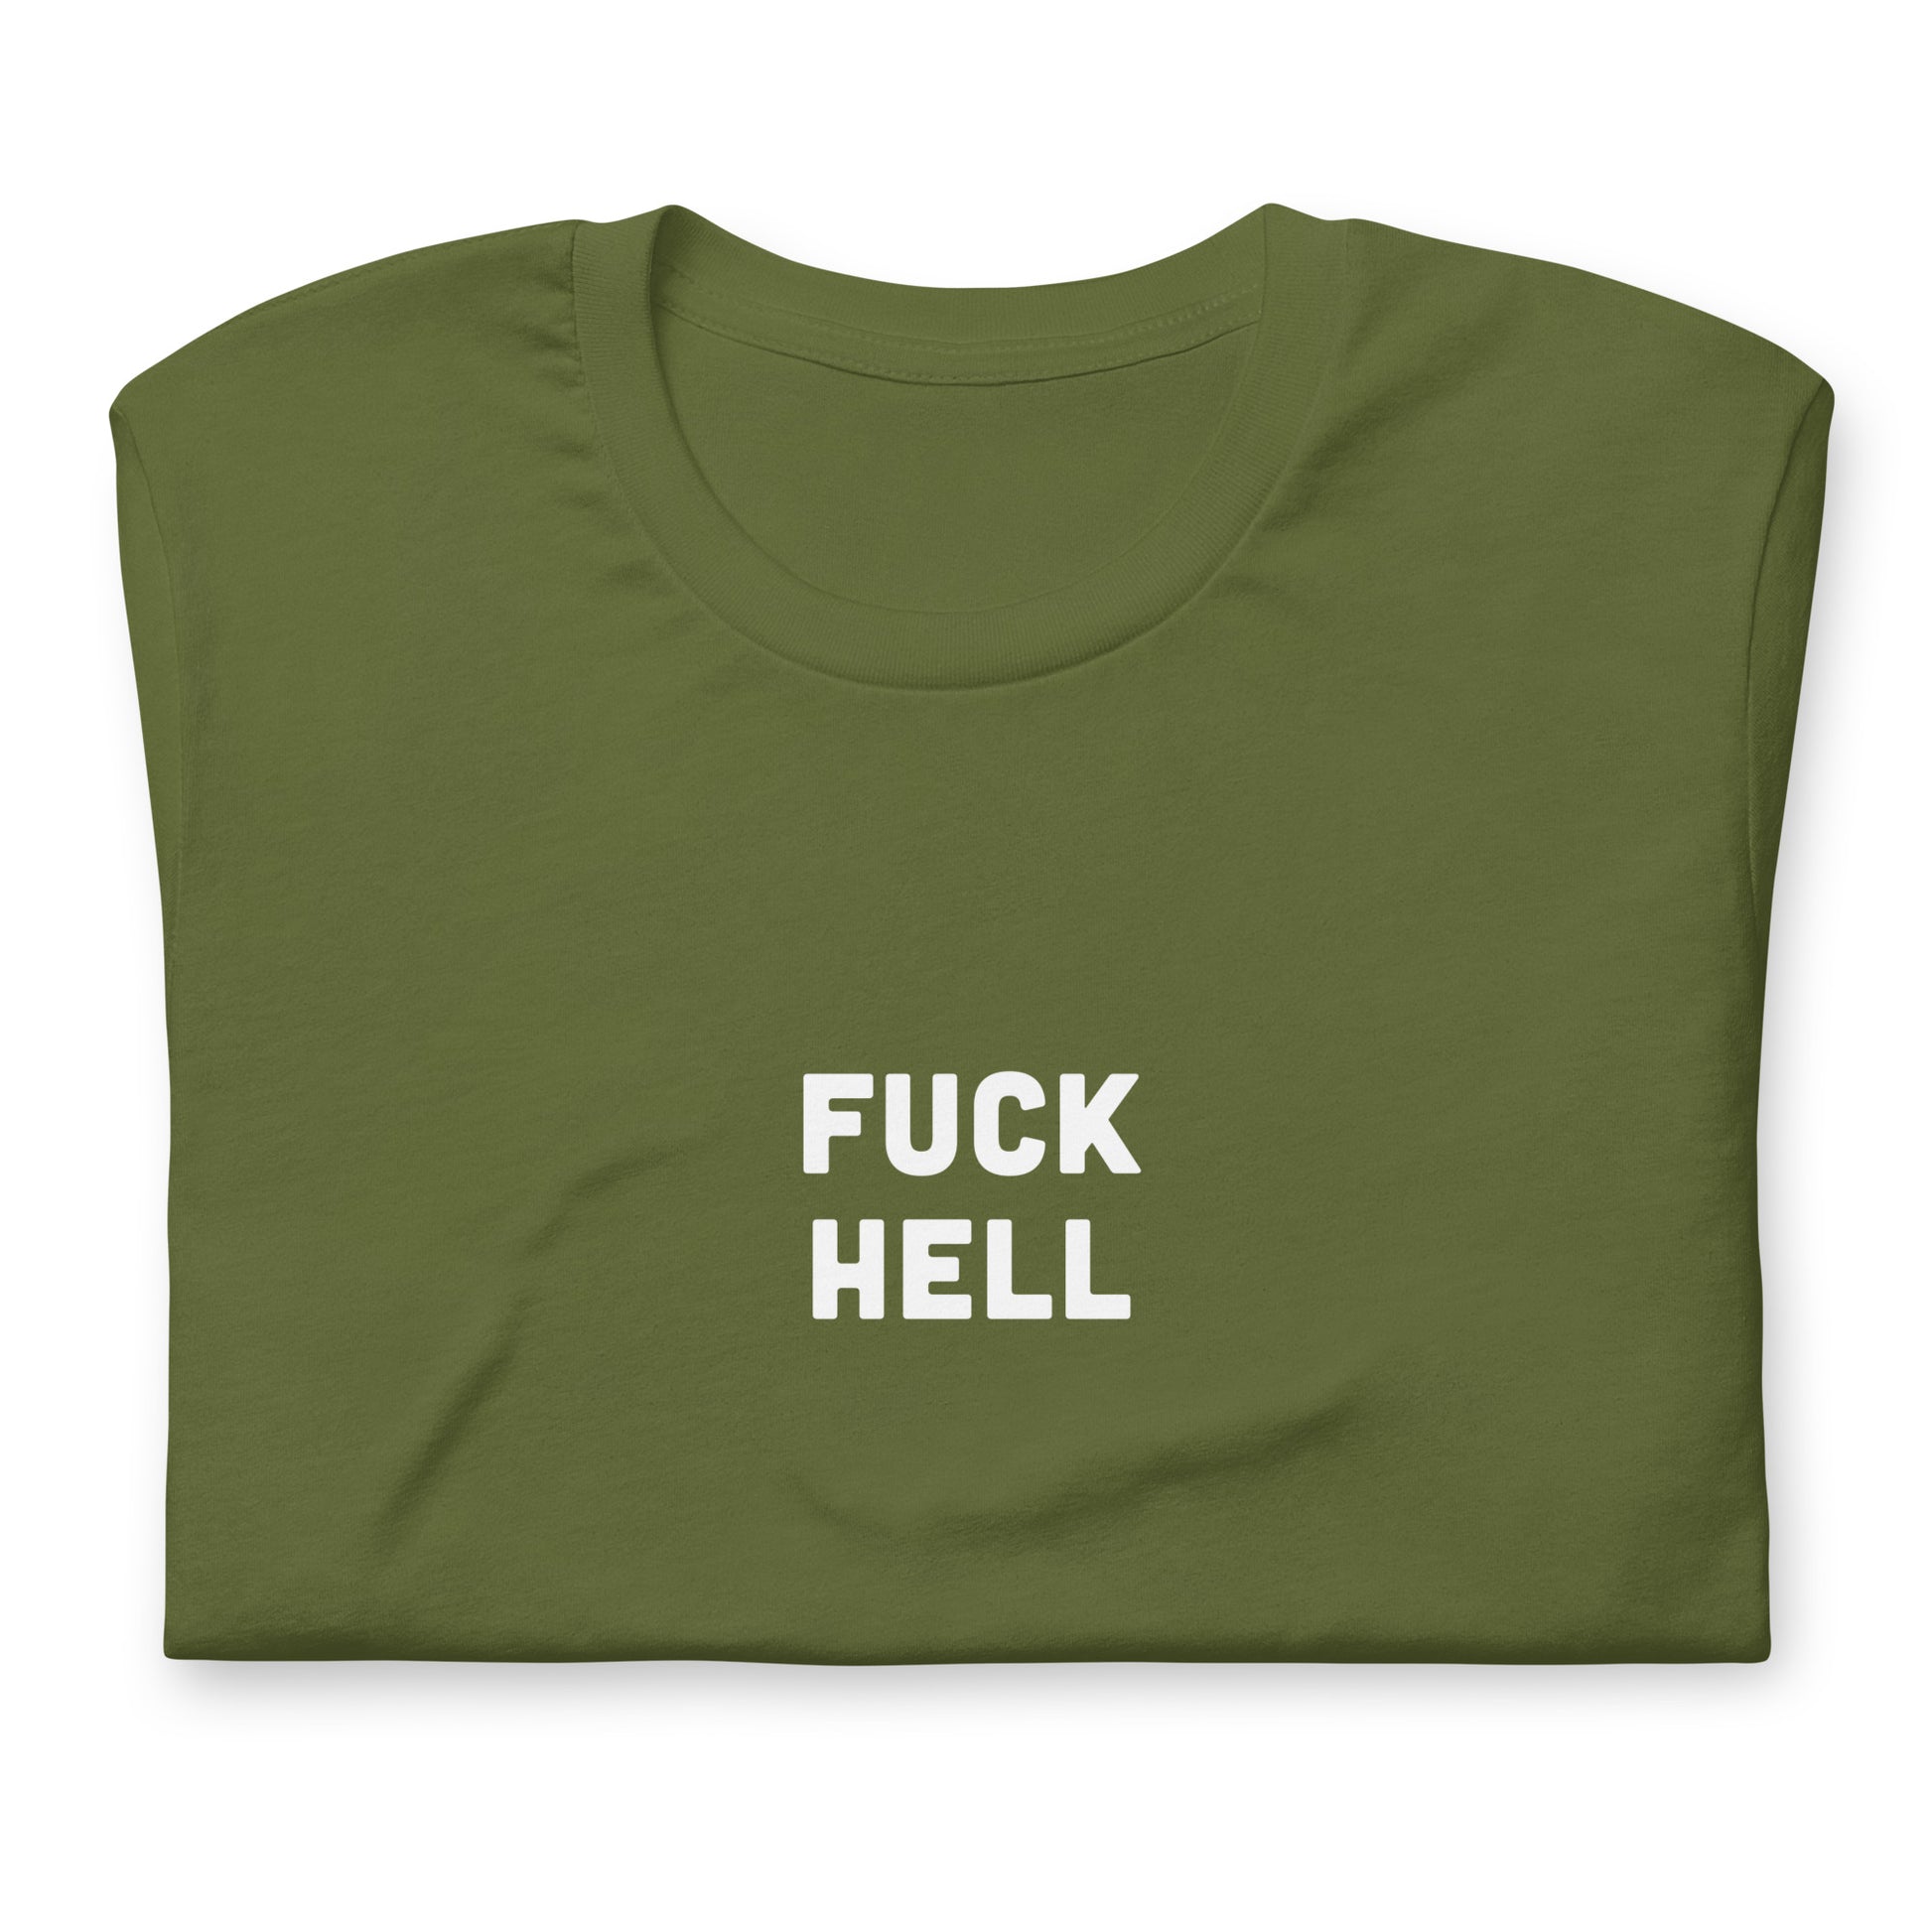 Fuck Hell T-Shirt Size S Color Navy